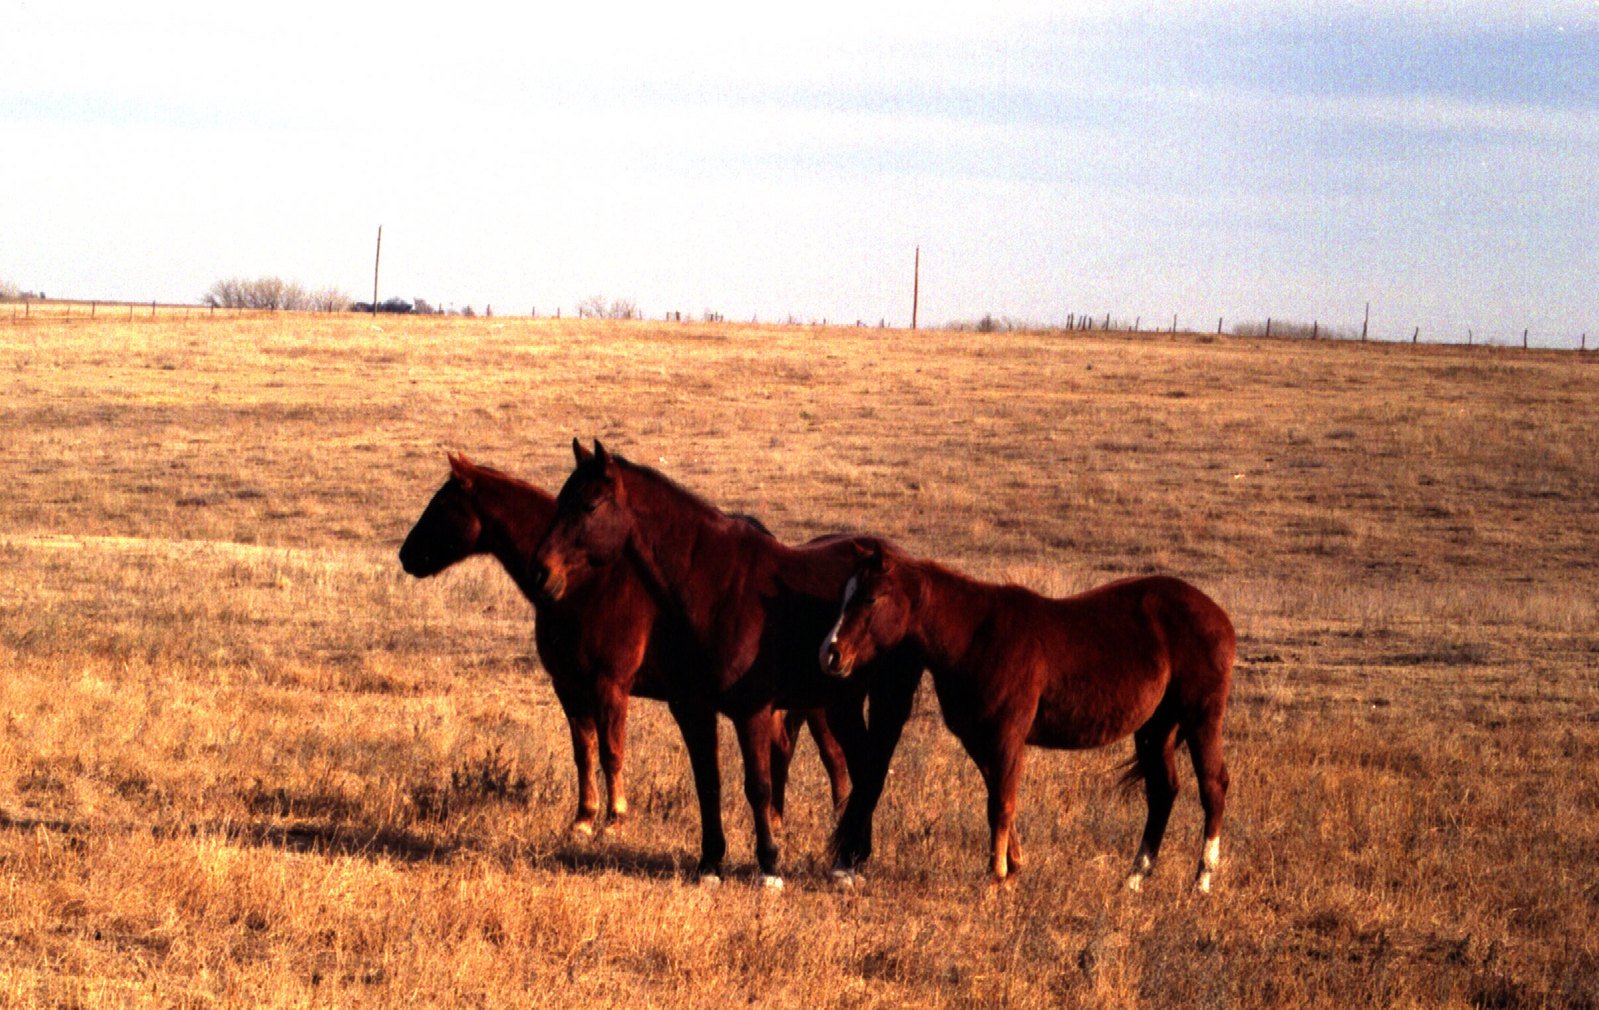 two horses standing in a field with brown grass